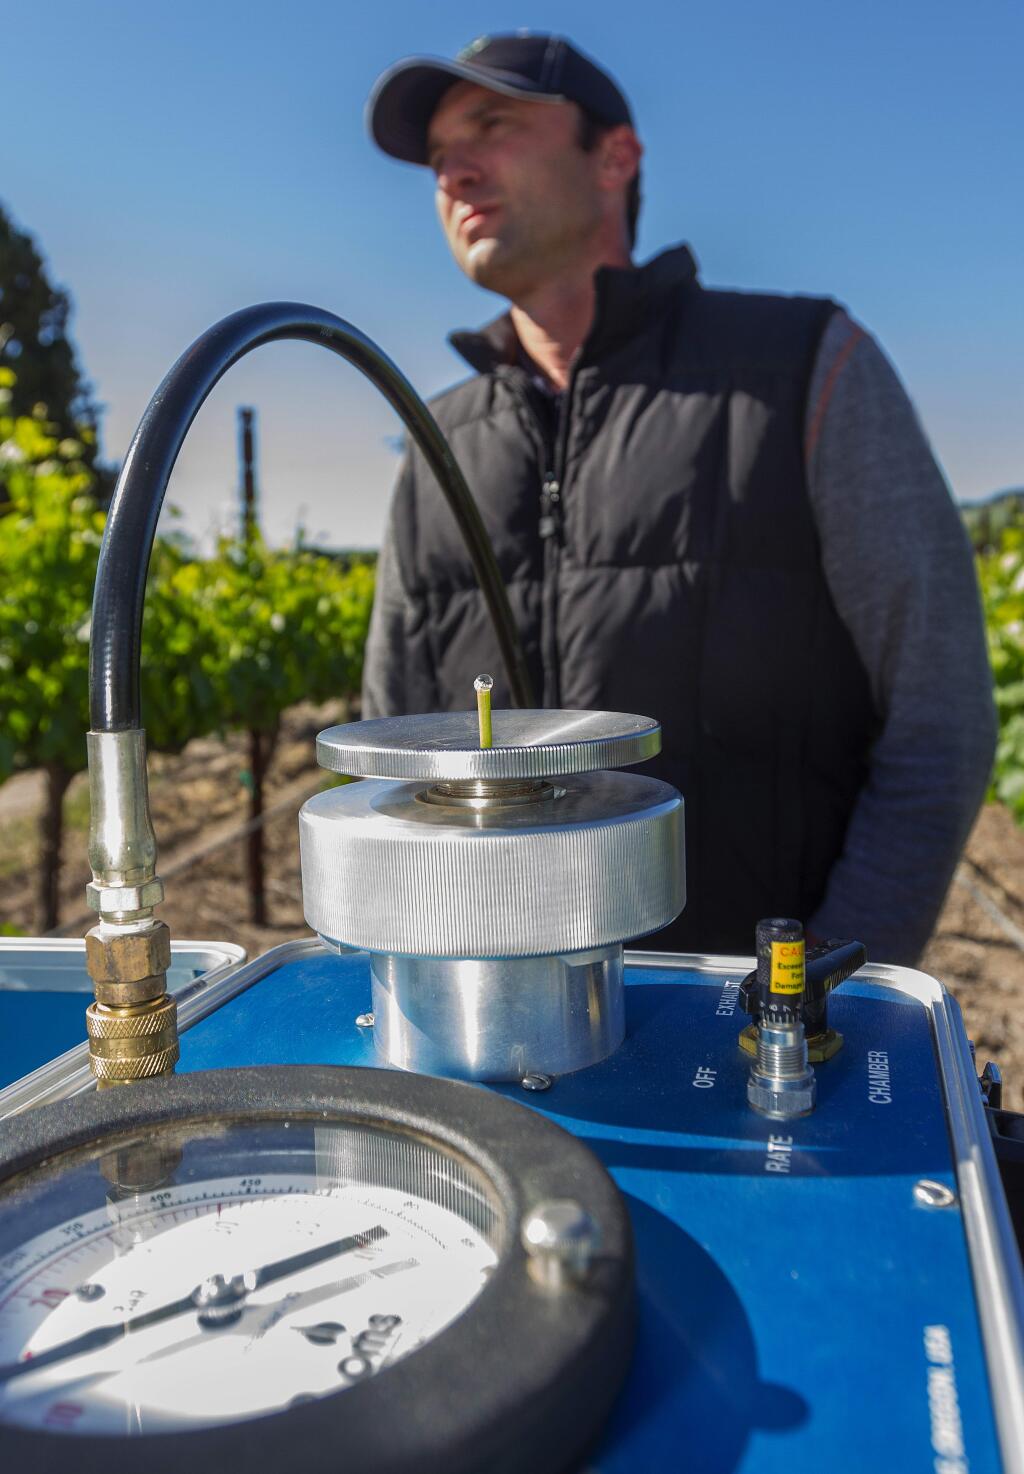 Robbi Pengelly/Index-TribuneSangiacomo Family Vineyards uses asensor from Tule technologies that measures the amount of water that evaporates by wind eddies.